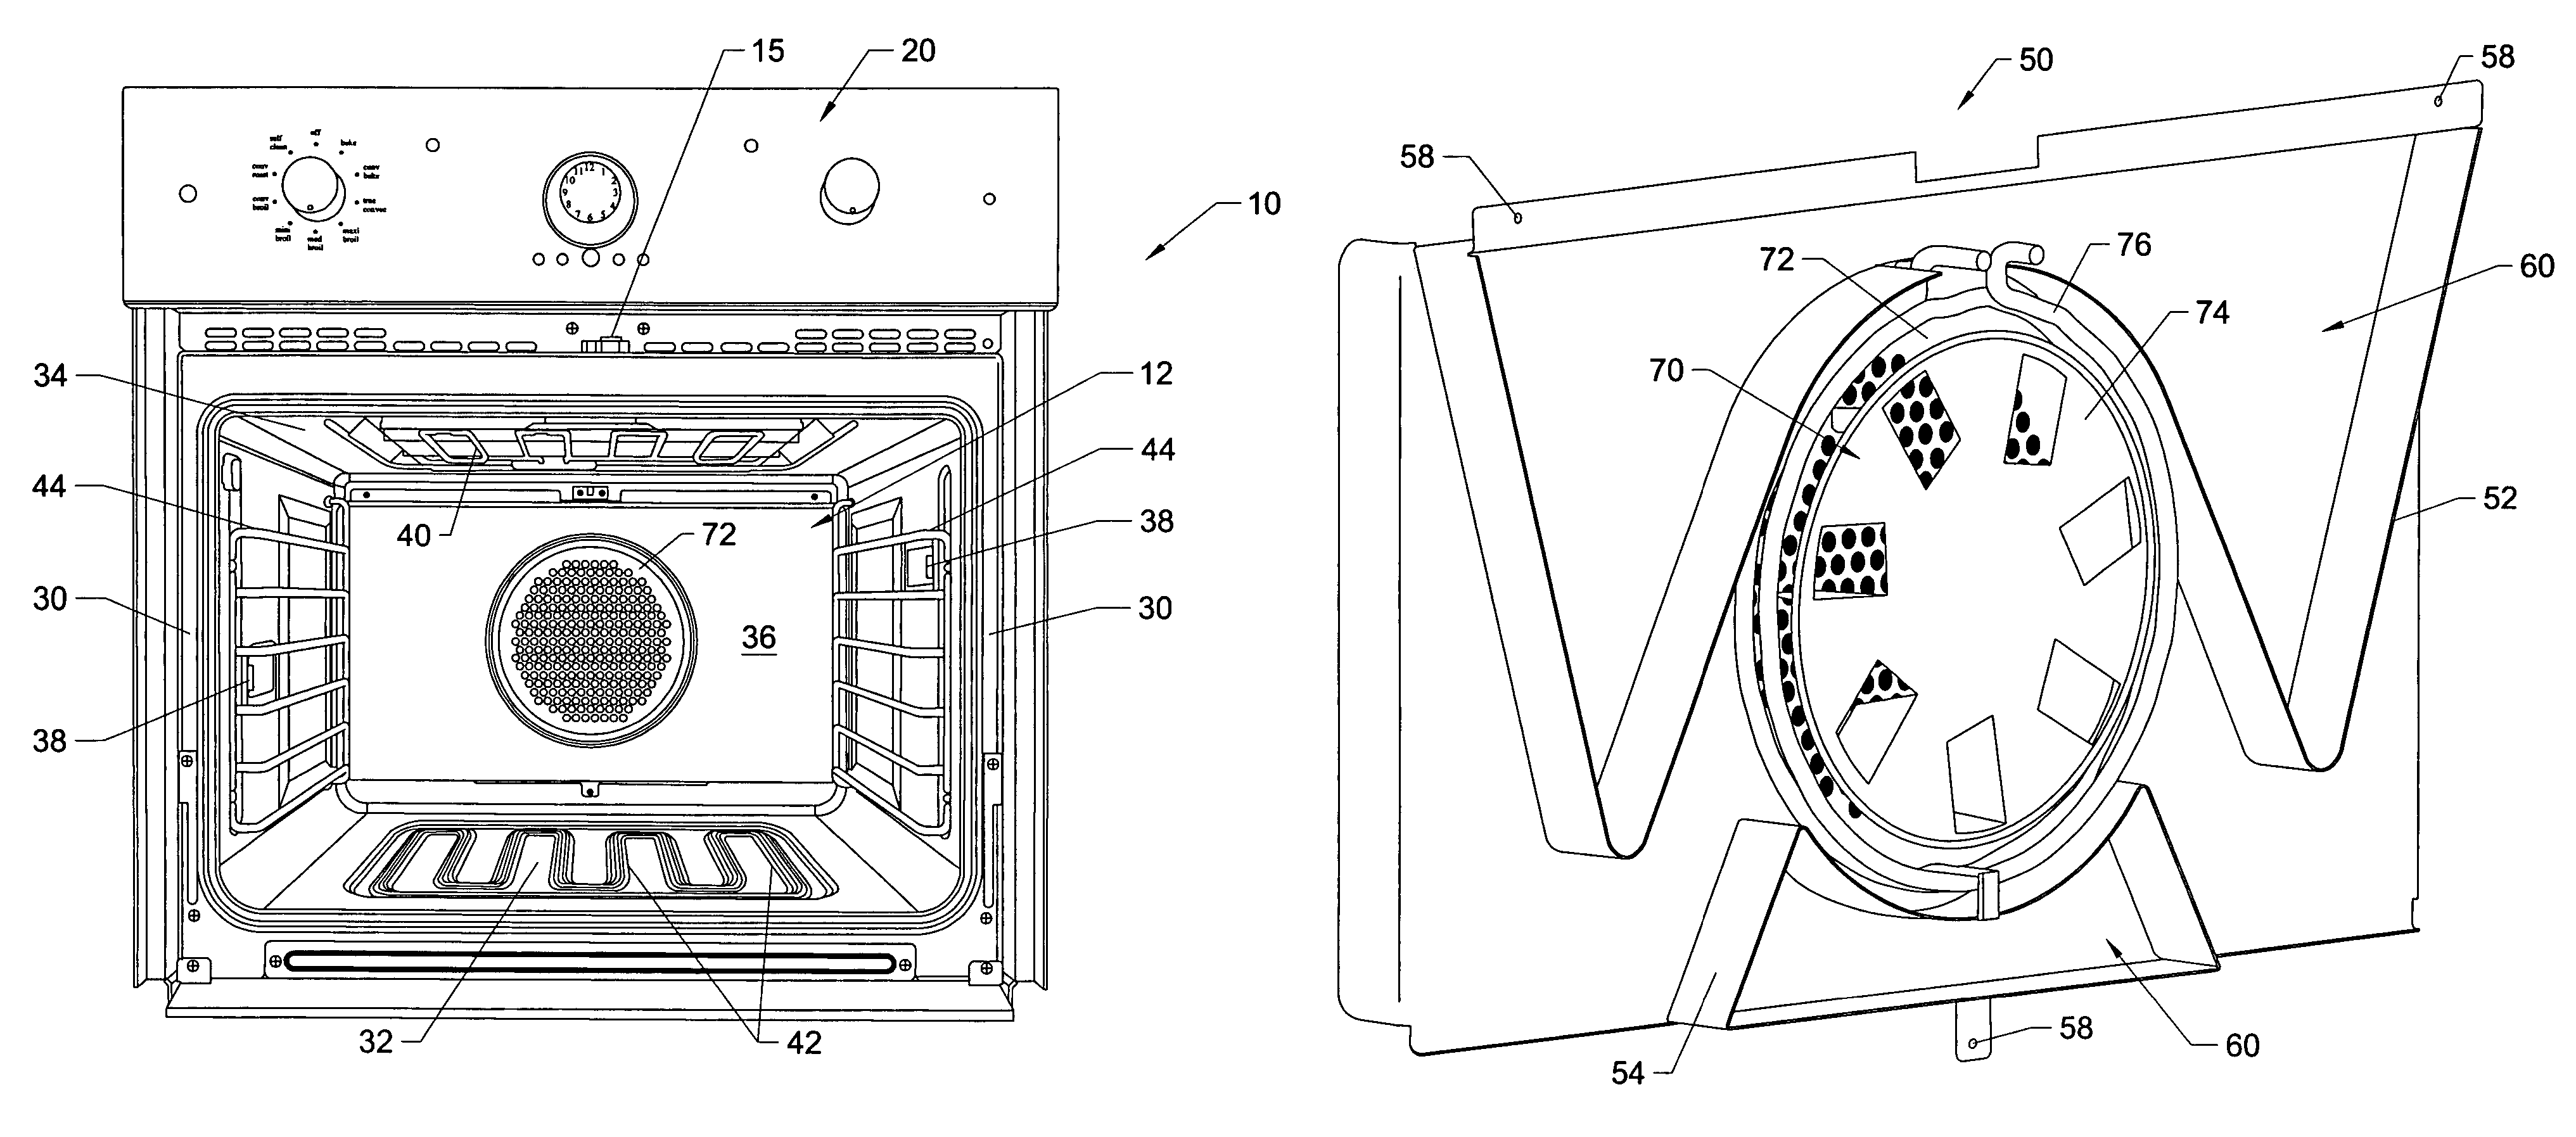 Multi-mode convection oven with flow control baffles